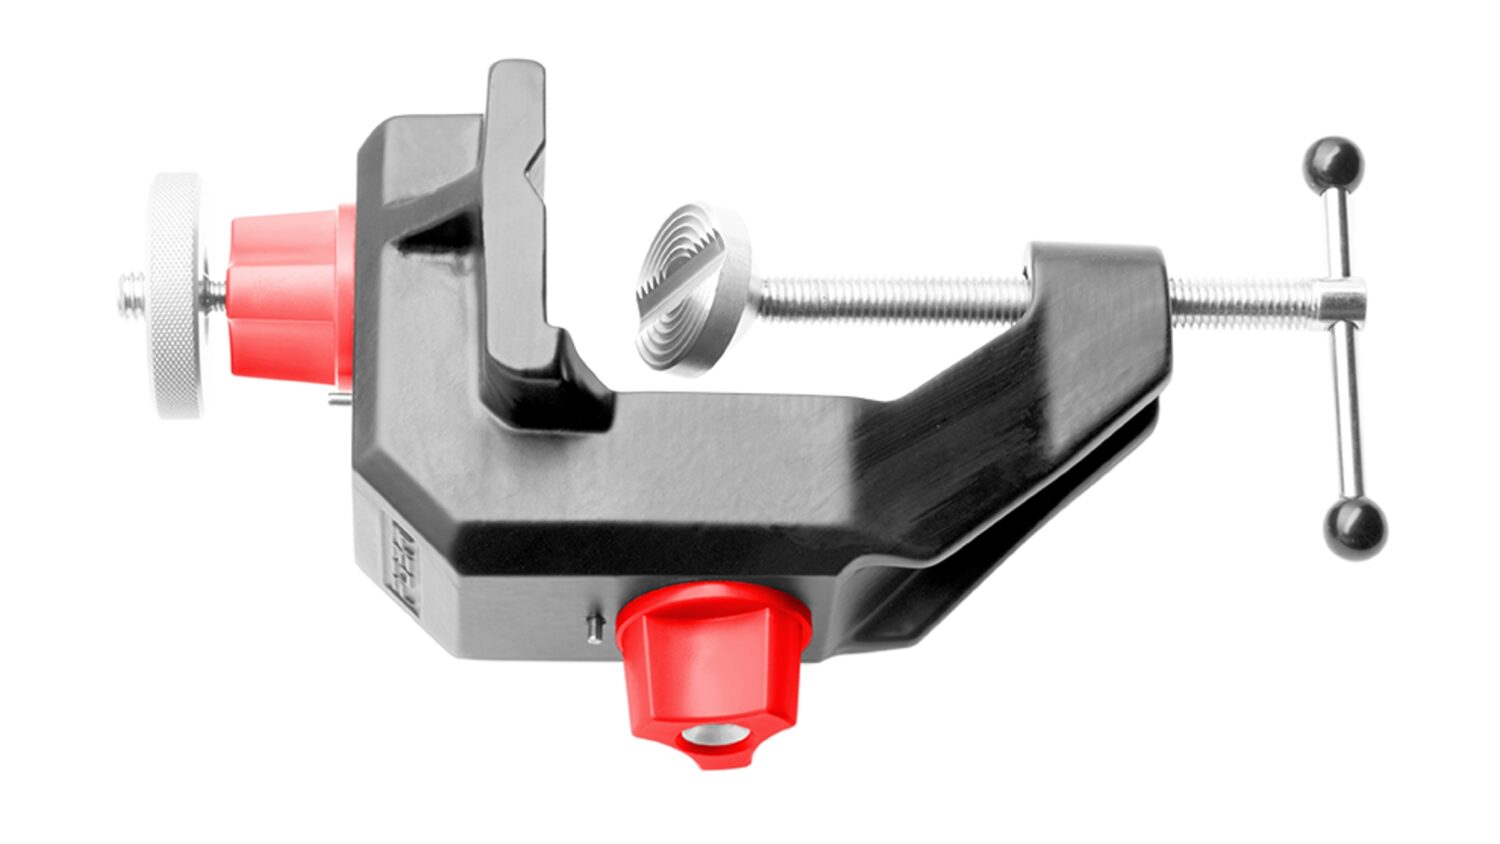 FOBA clamp for clamp stand